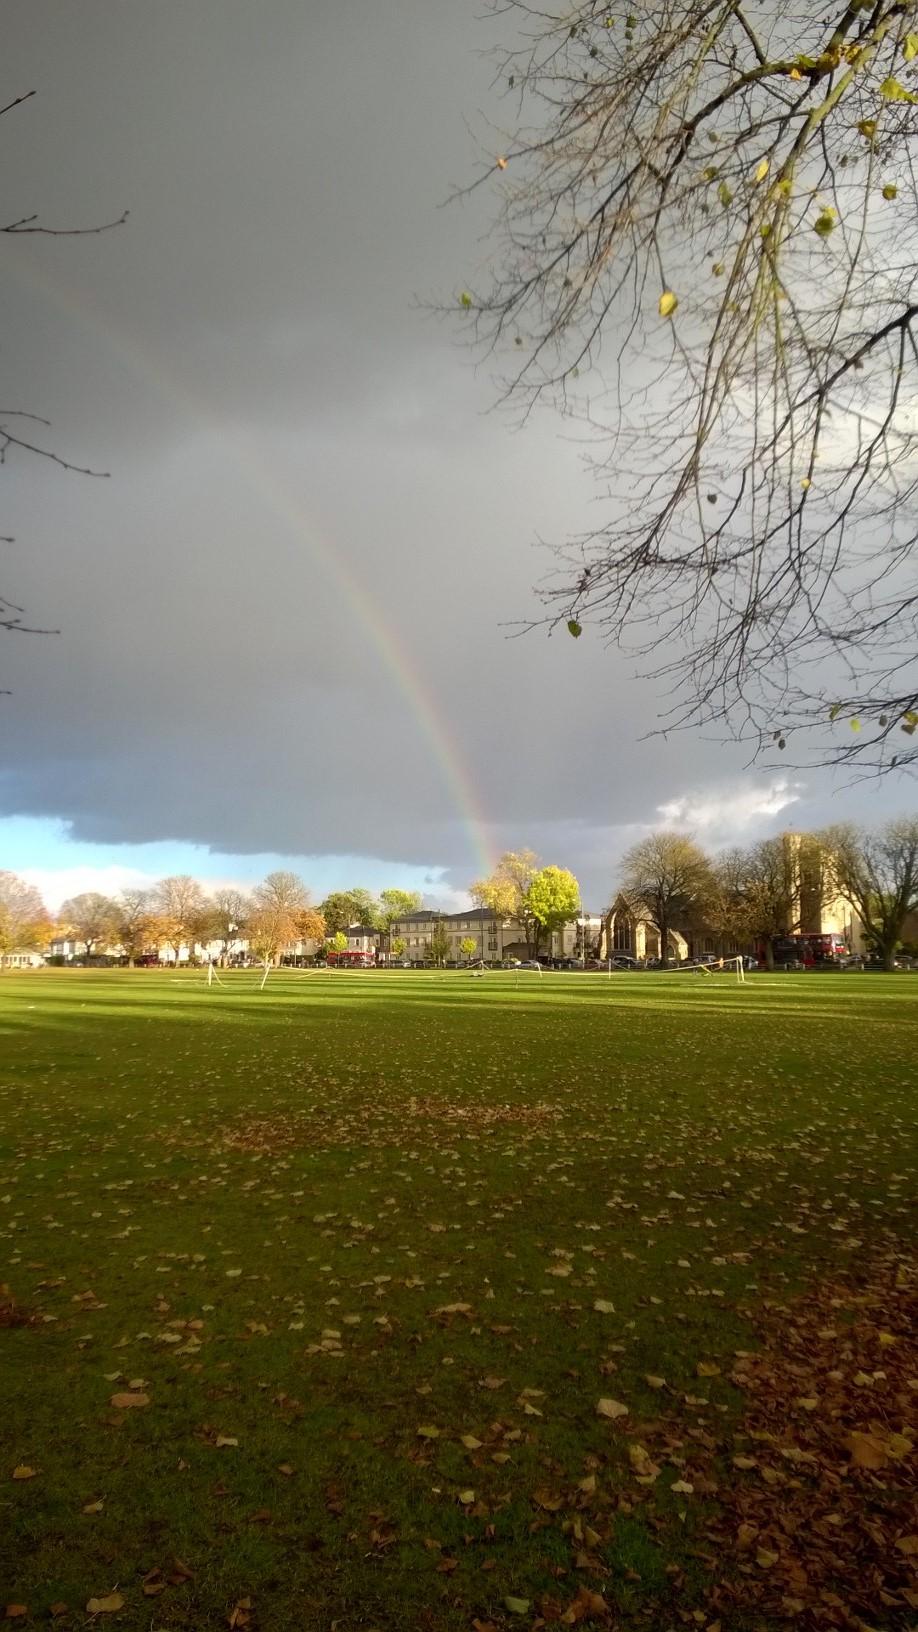 Mairi McLeod took this photo on Twickenham Green during the school pick up. She said: "It usually rains then and we were not disappointed despite the promise of a blue sky in the distance."